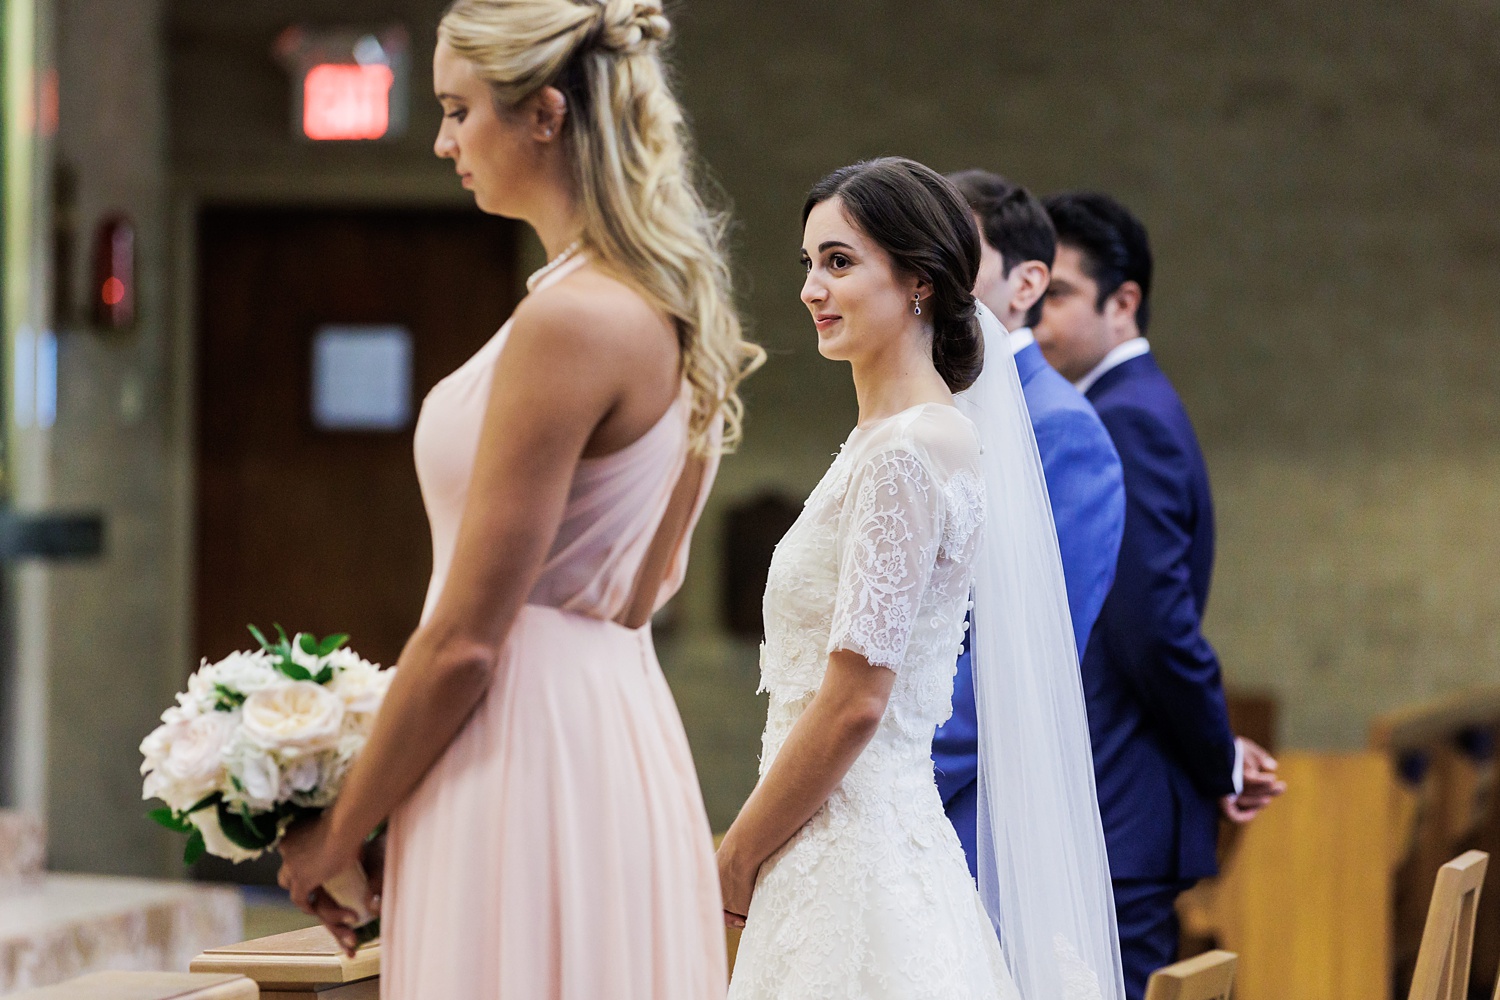 The bride smiles at her sister while at the altar